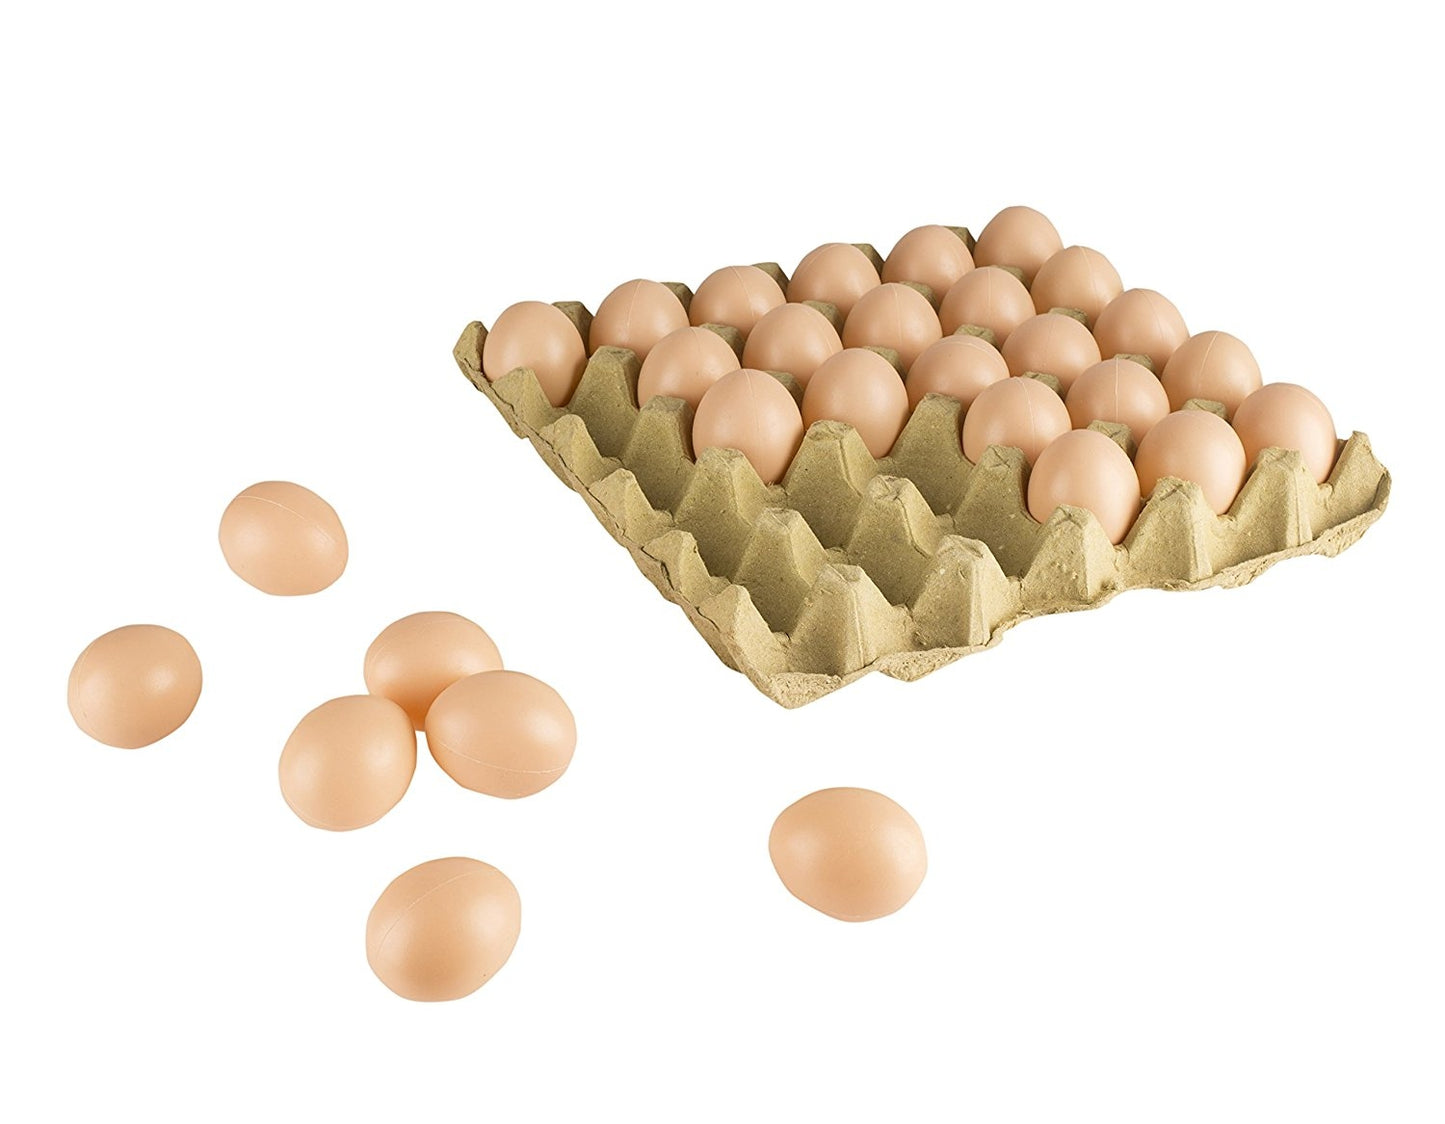 30 Fake Chicken eggs on Tray Realistic Egg Toy Food Playset For Kids - Pretend Play Artificial Kitchen Foods - Faux Eggs Home Decor